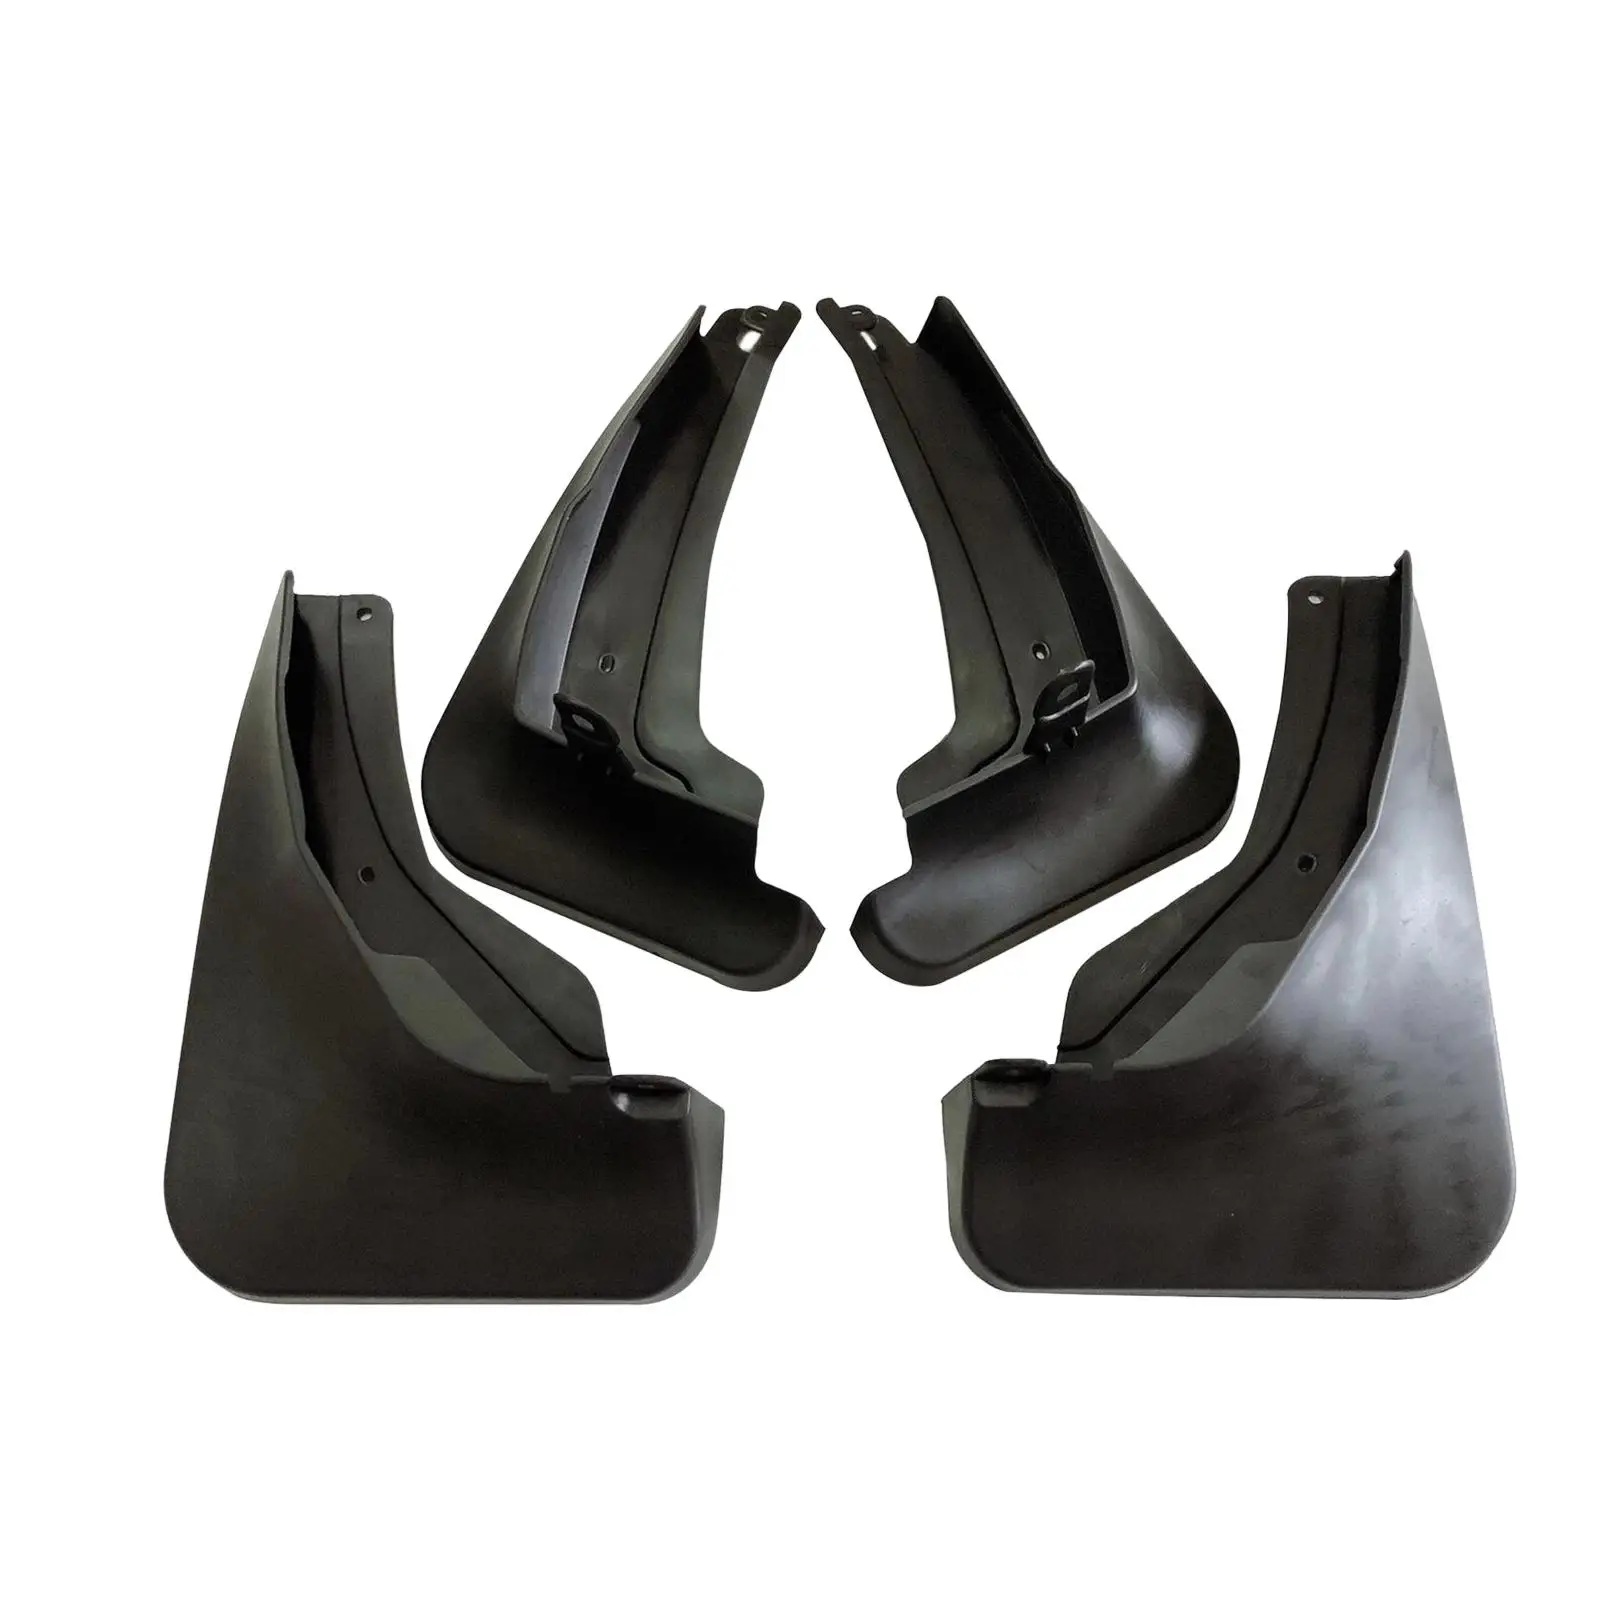 4x Car Mudguard Replaces Parts Accessory Mudflaps for Byd Song Plus Pro